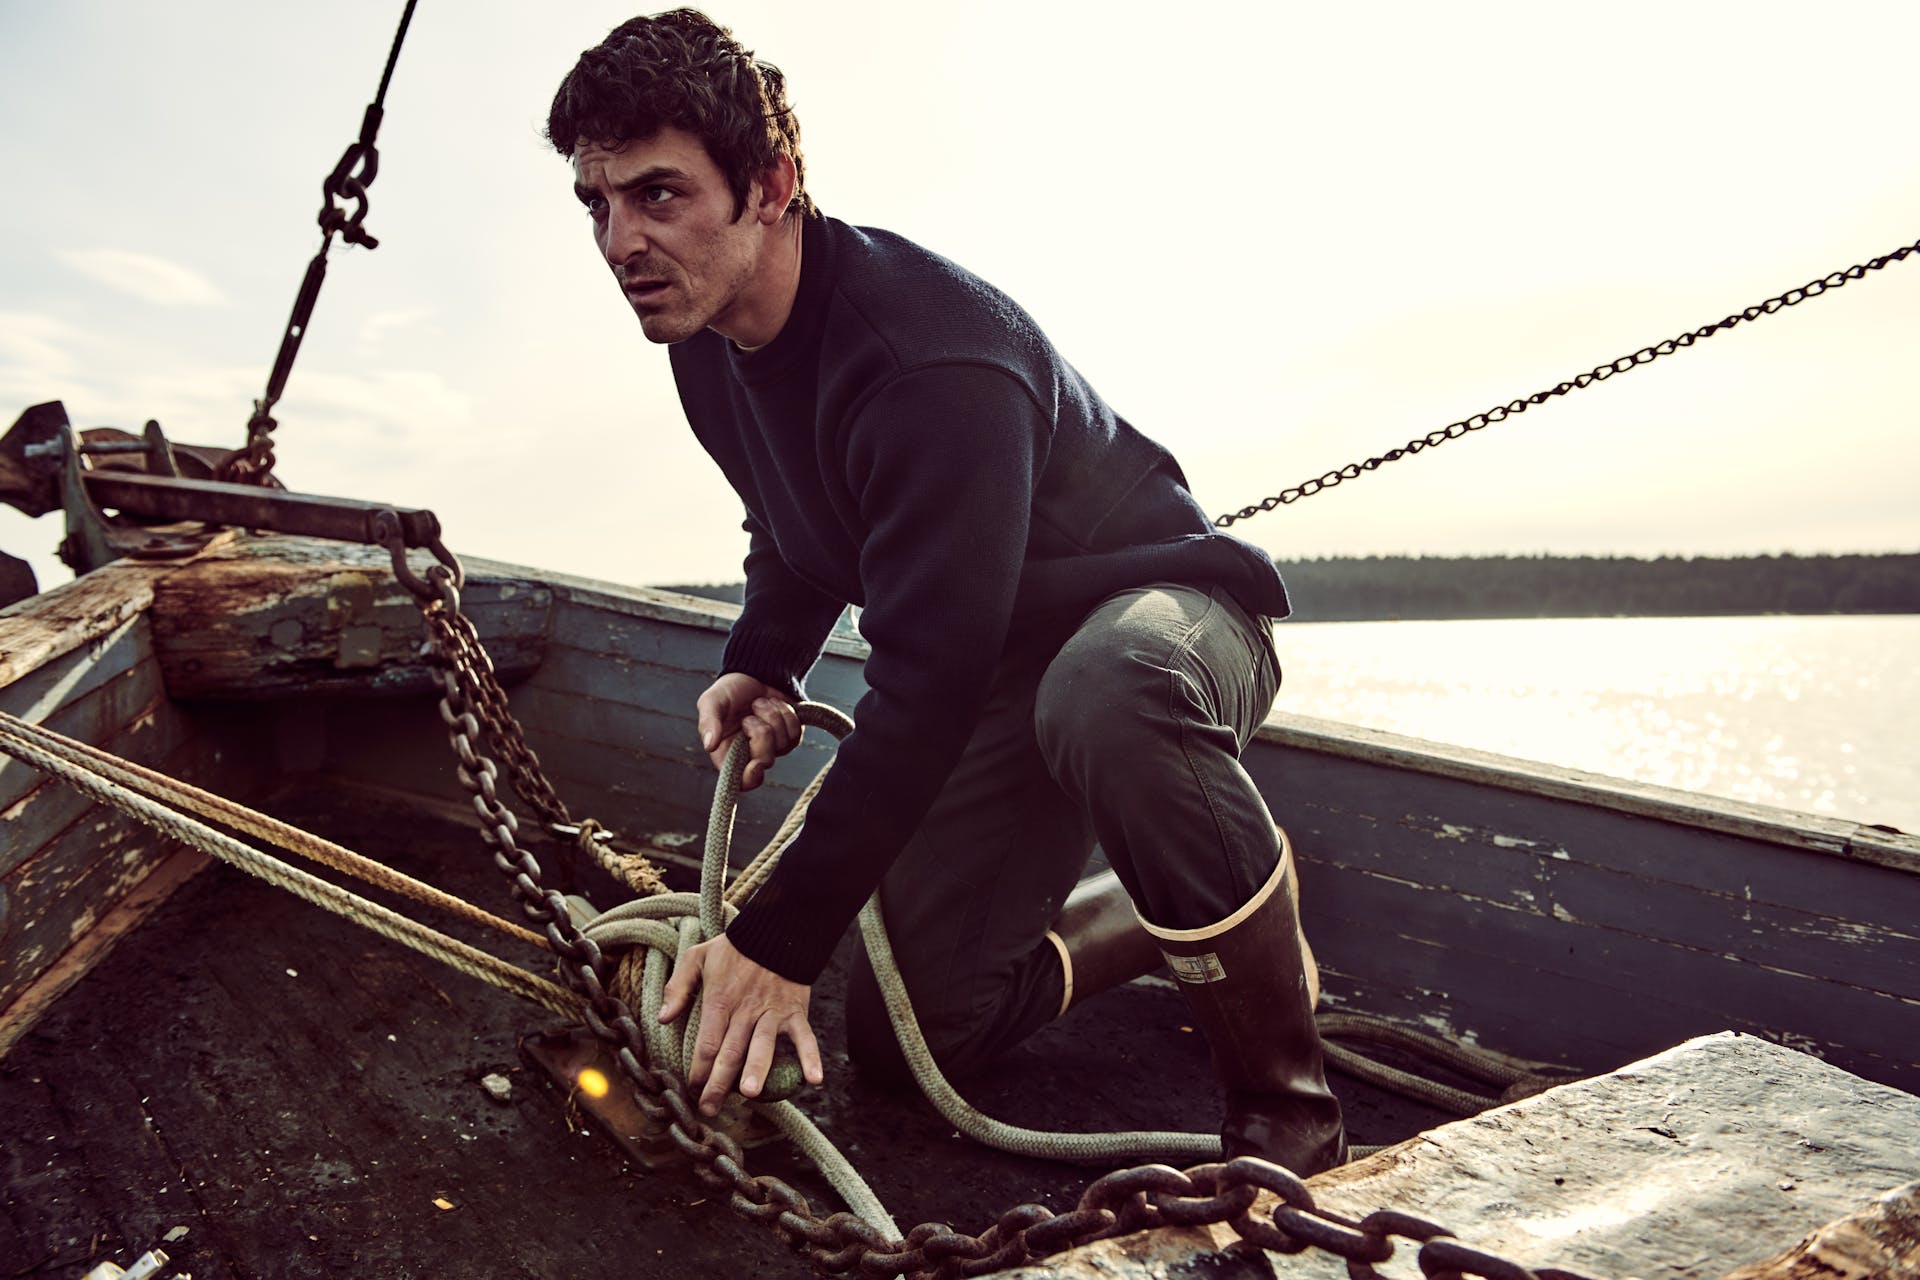 Sailor on a boat tying a knot on a cleat wearing a Filson Crewneck Guide Sweater